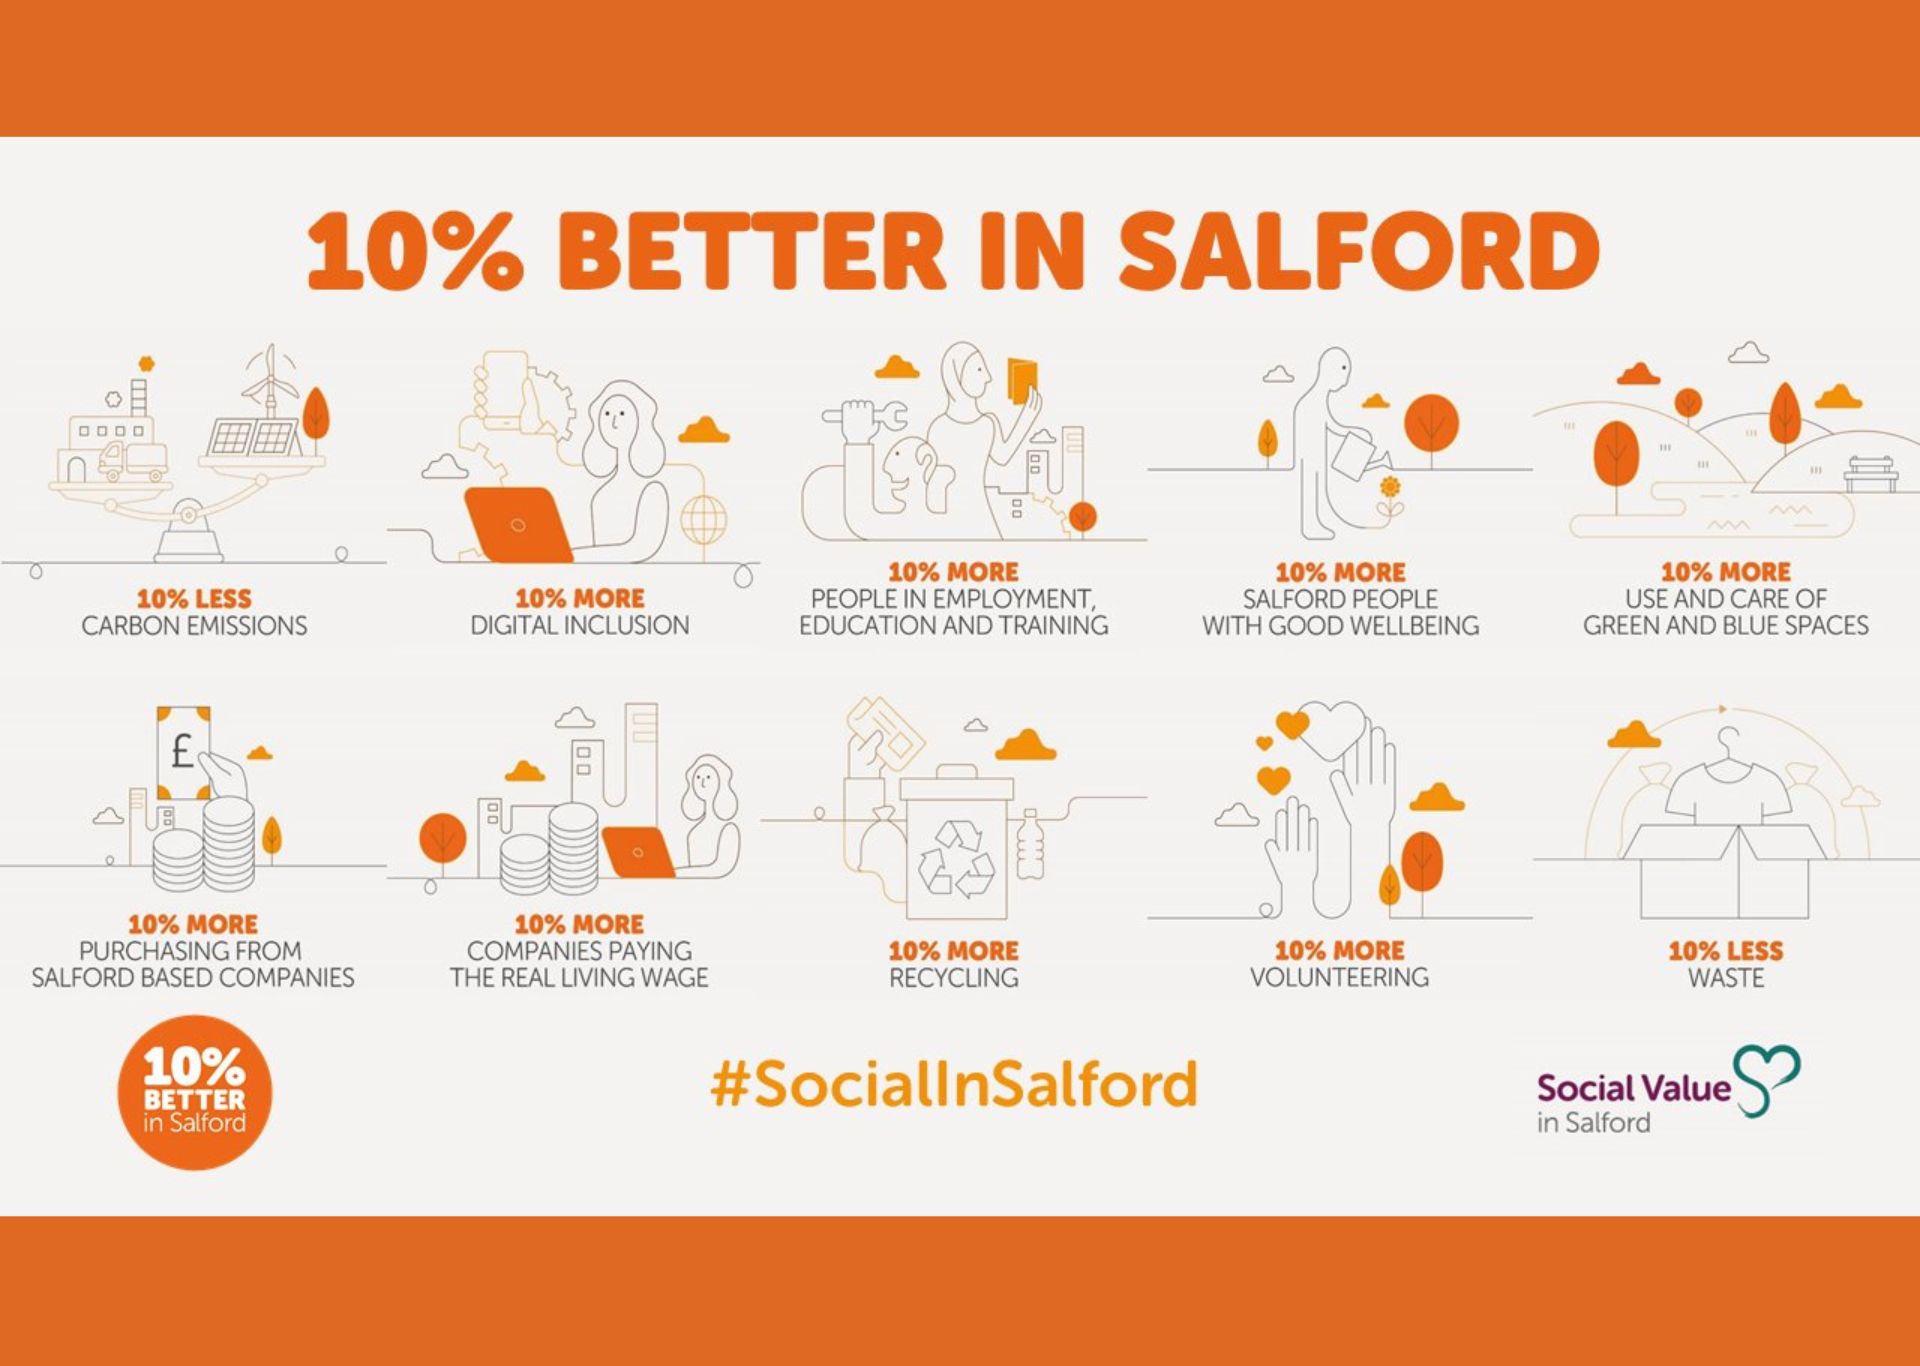 committing to Salford - social value